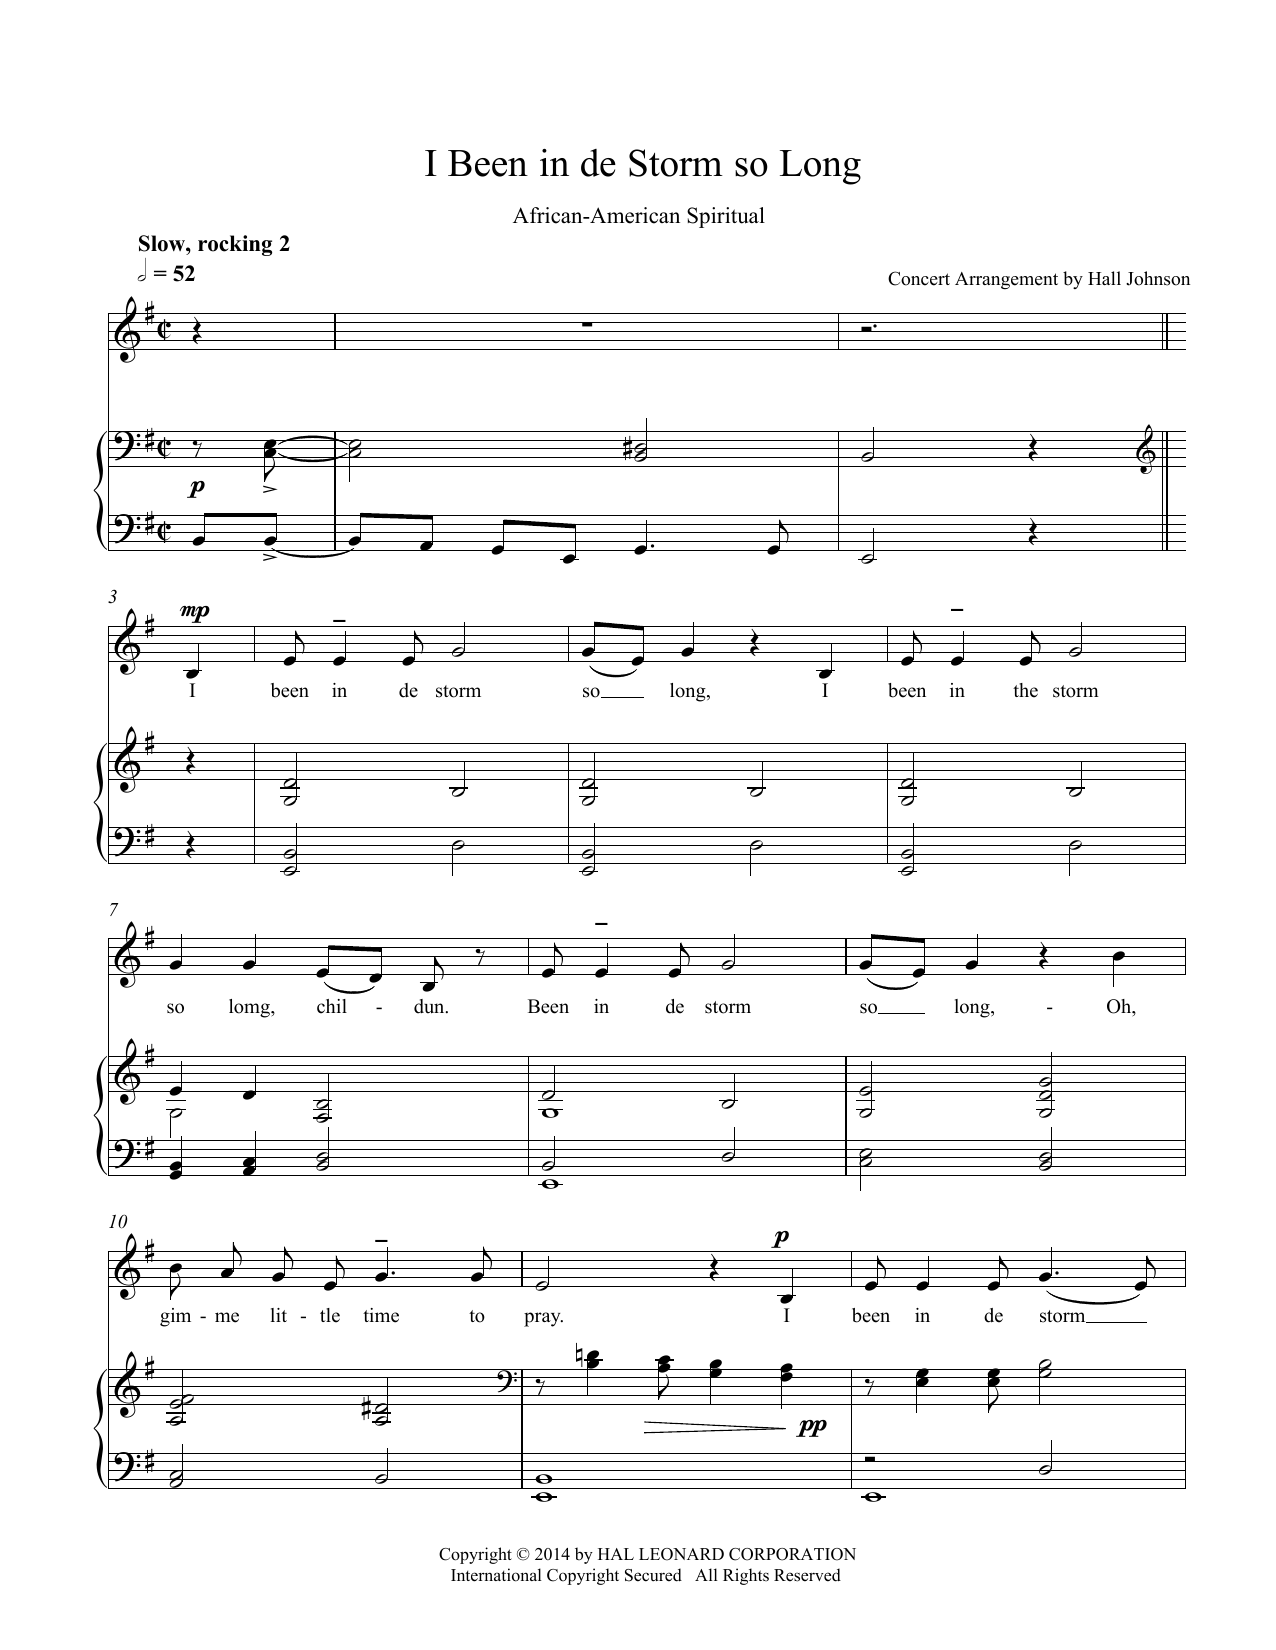 Hall Johnson I Been in de Storm So Long (E minor) sheet music notes and chords. Download Printable PDF.